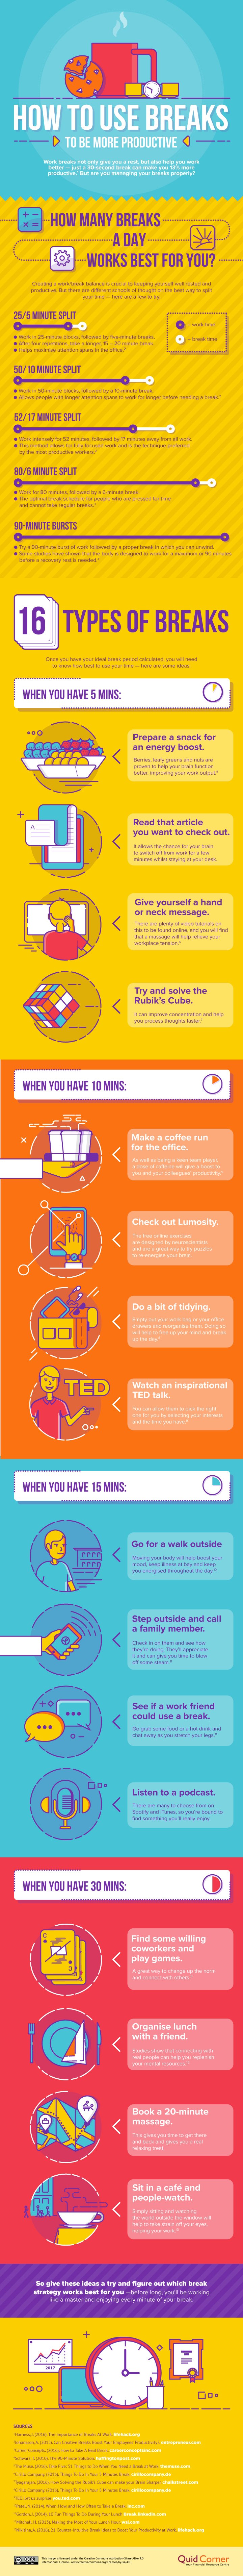 using breaks to increase productivity infographic